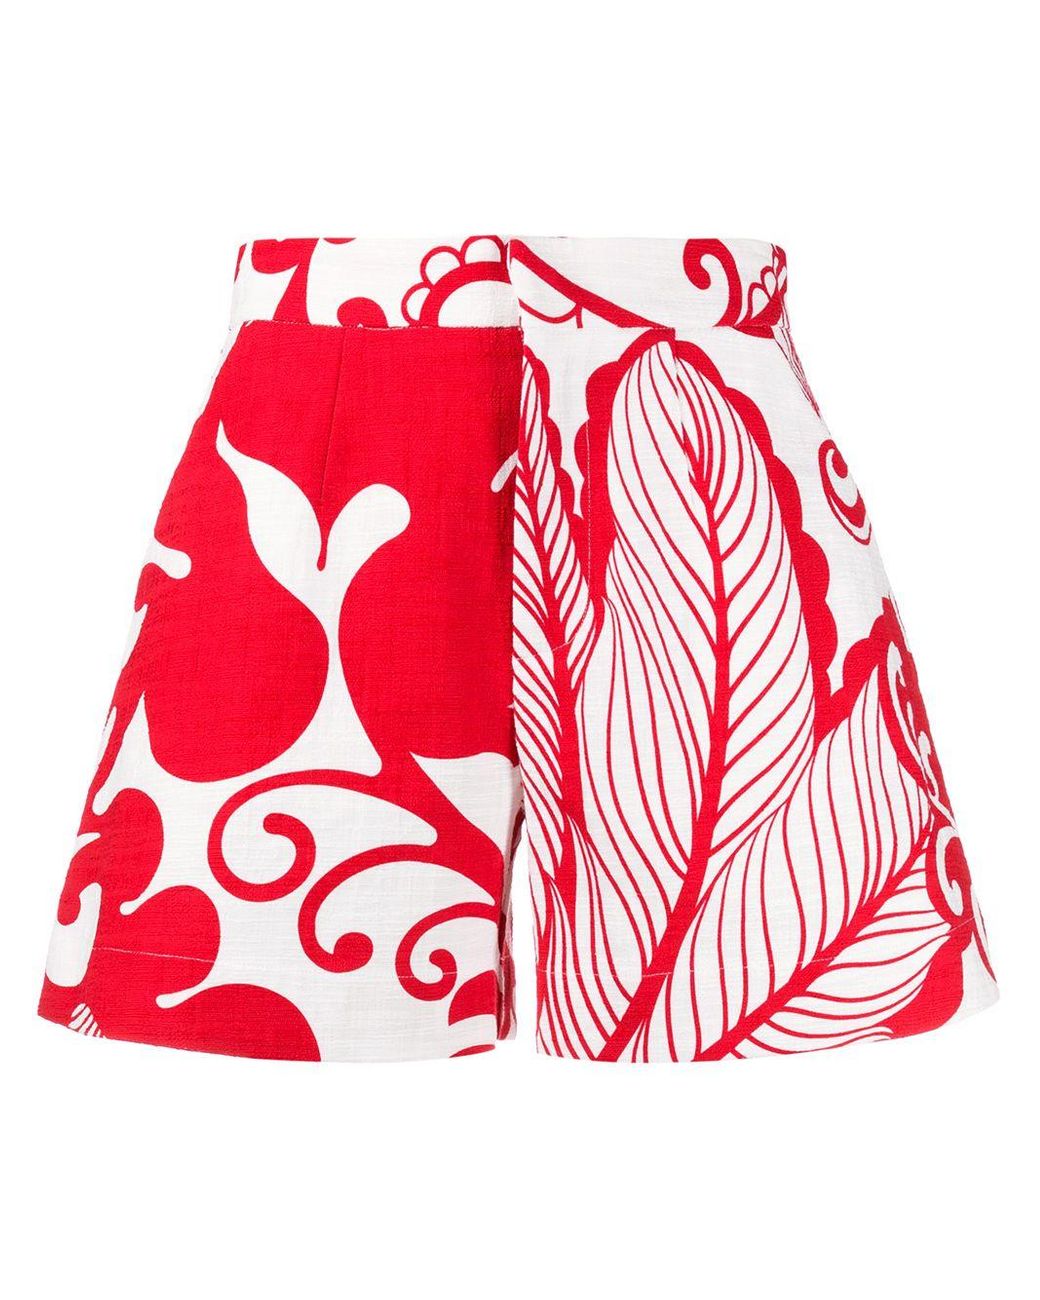 LaDoubleJ Synthetic X Mantero Marea Printed Shorts in White - Lyst